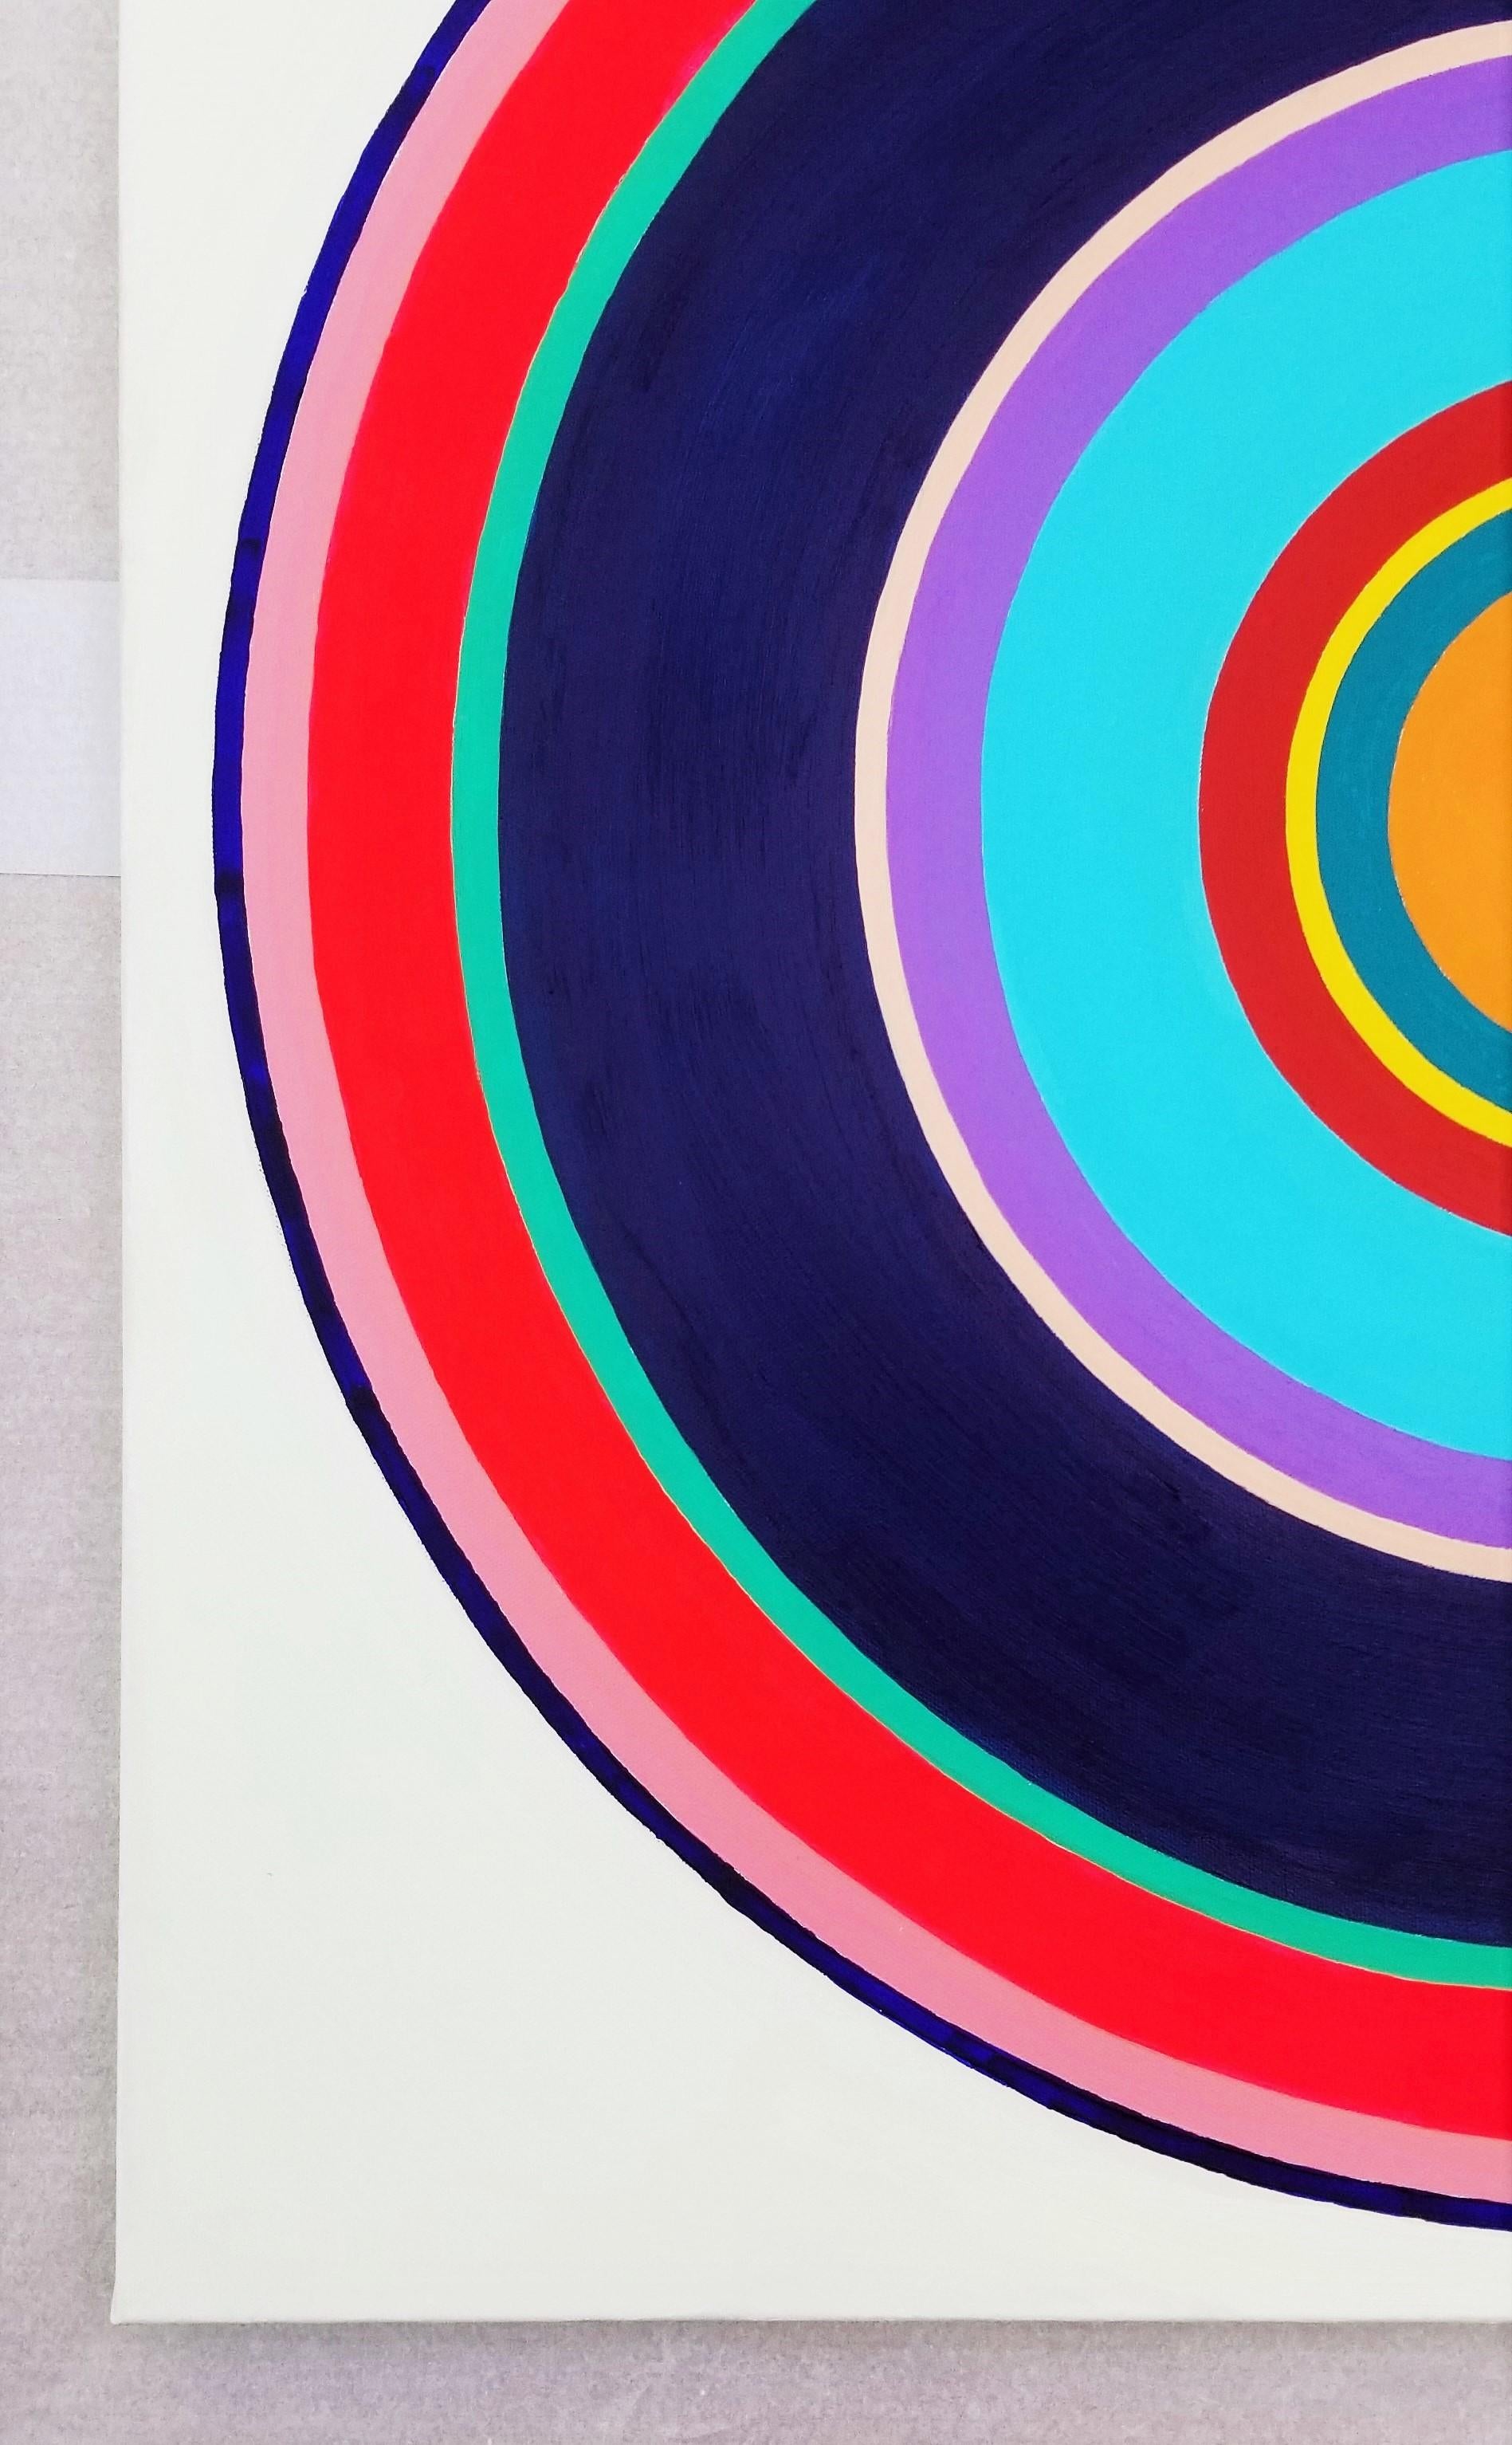 Aura V /// Contemporary Abstract Geometric Circles Colorful Art Striped Minimal - Painting de Jack Graves III